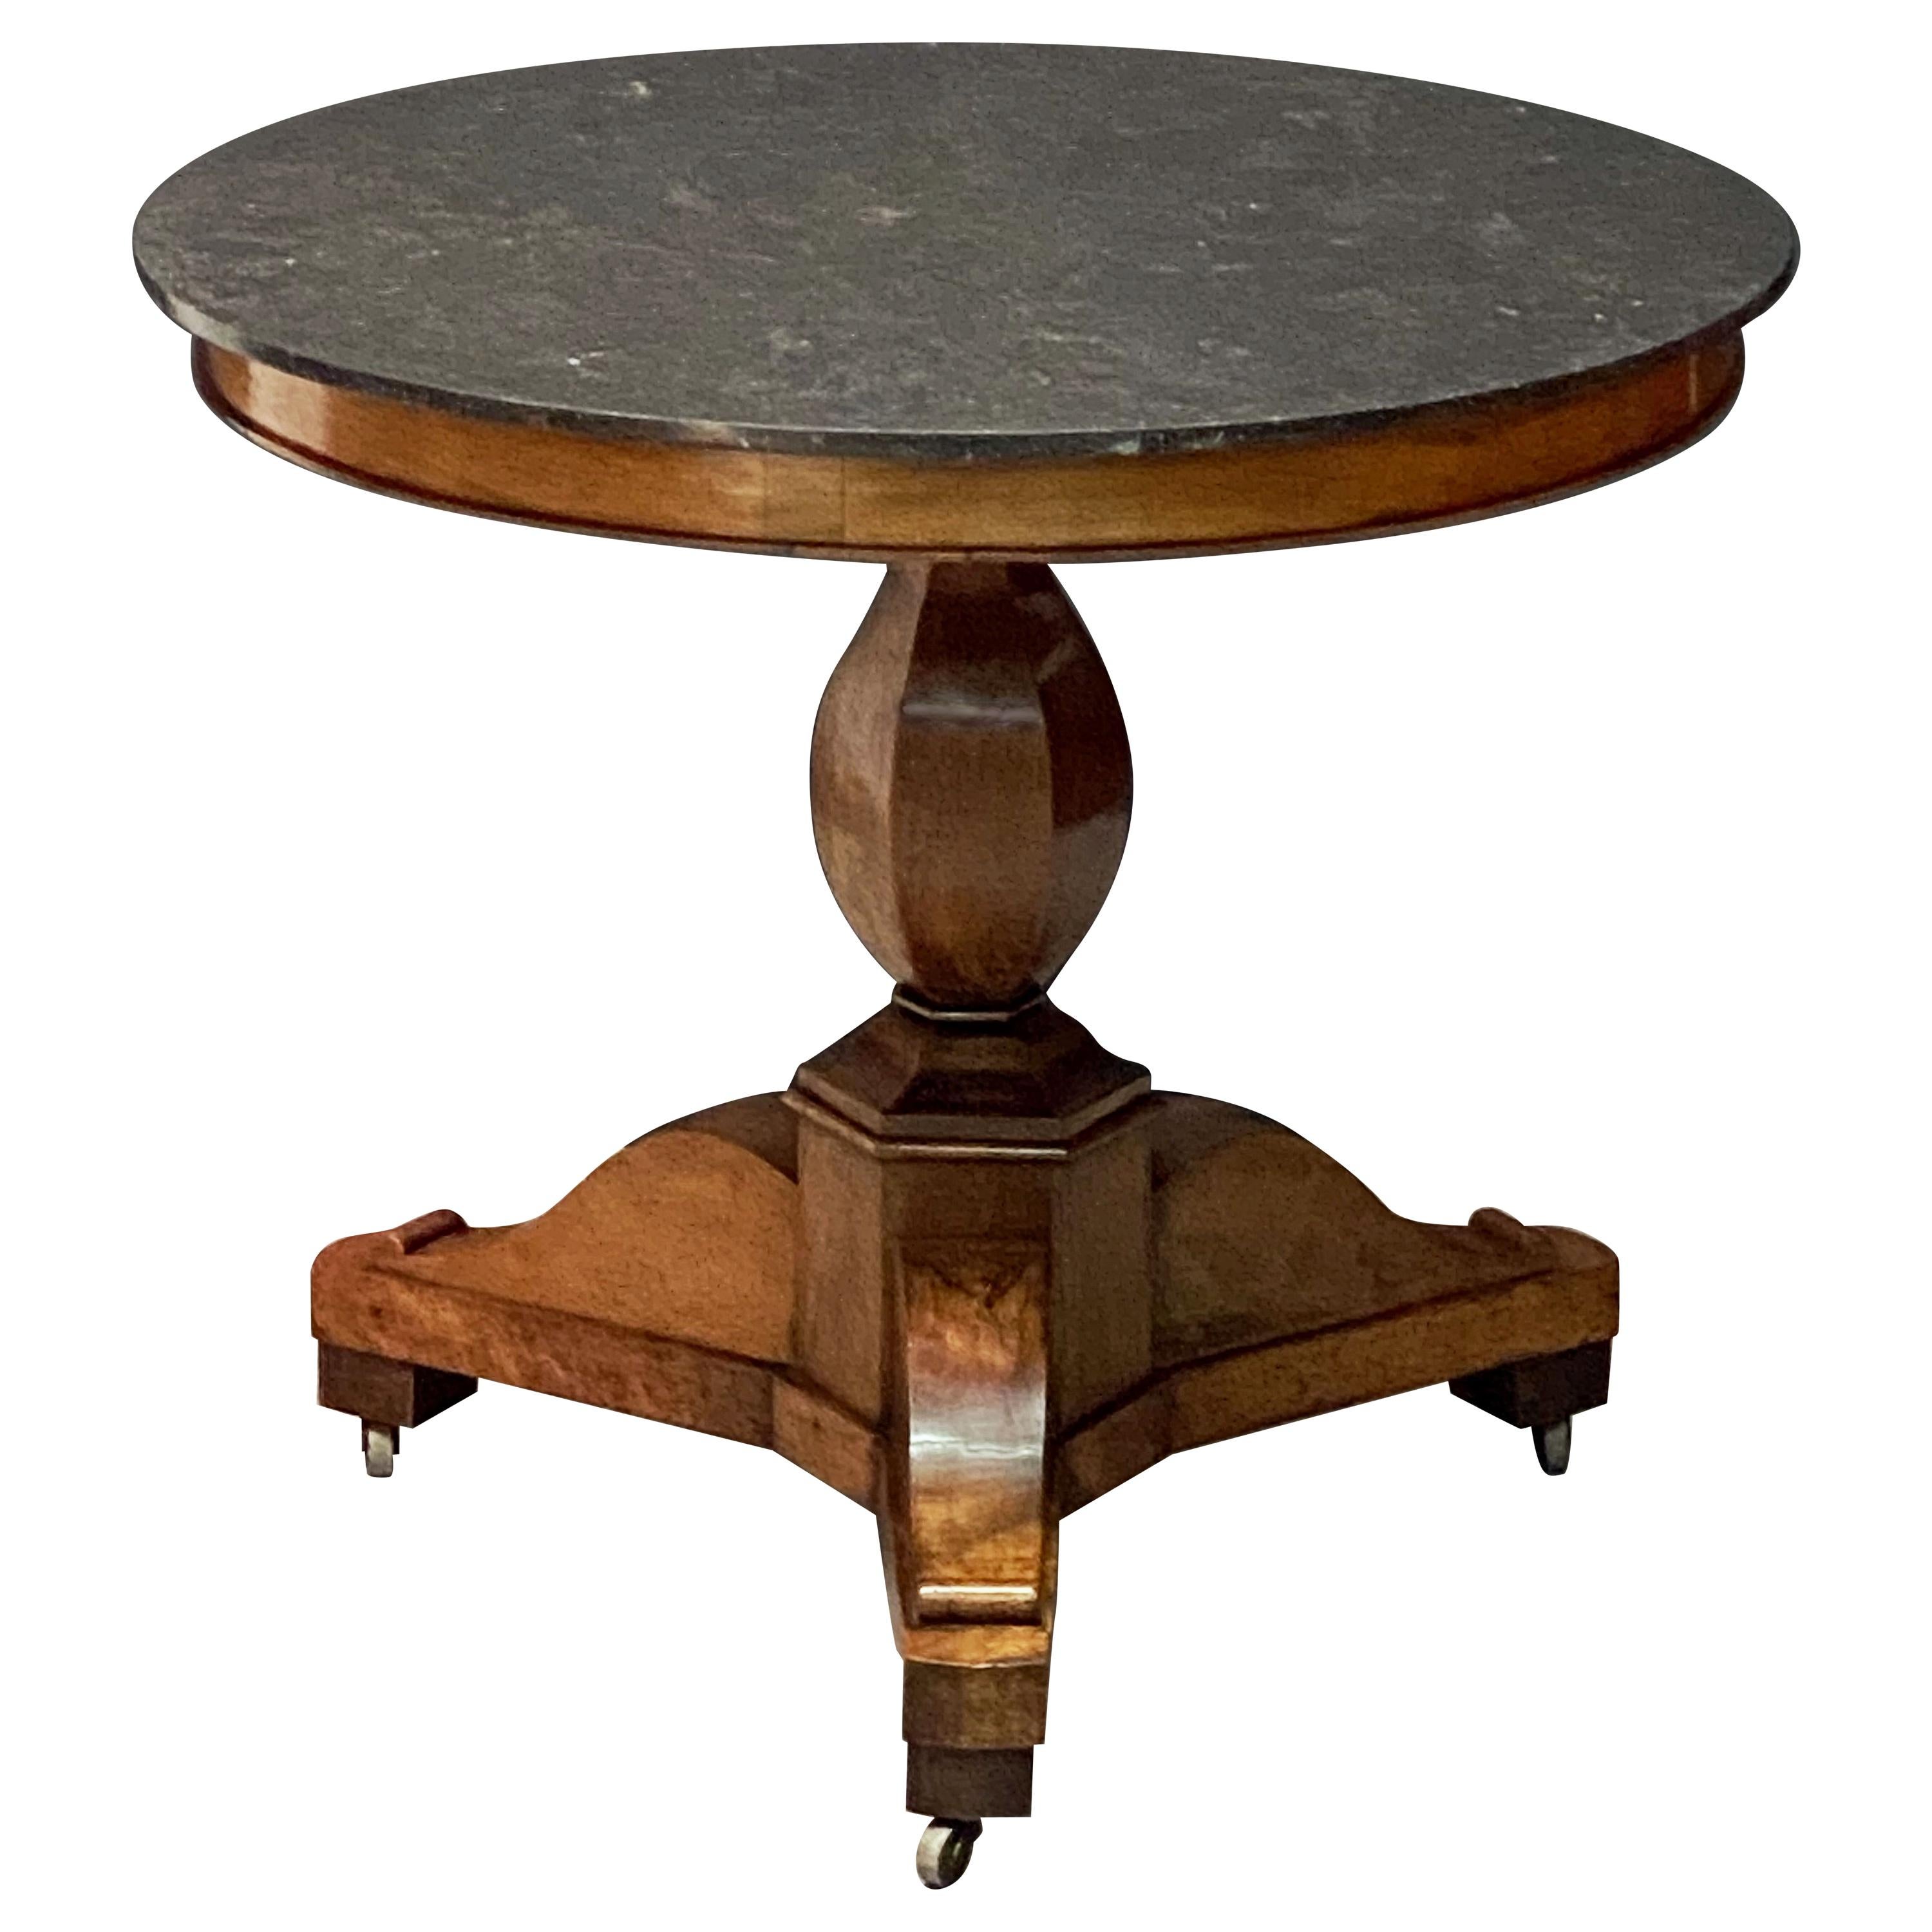 French Guéridon or Round Table of Walnut with Marble Top